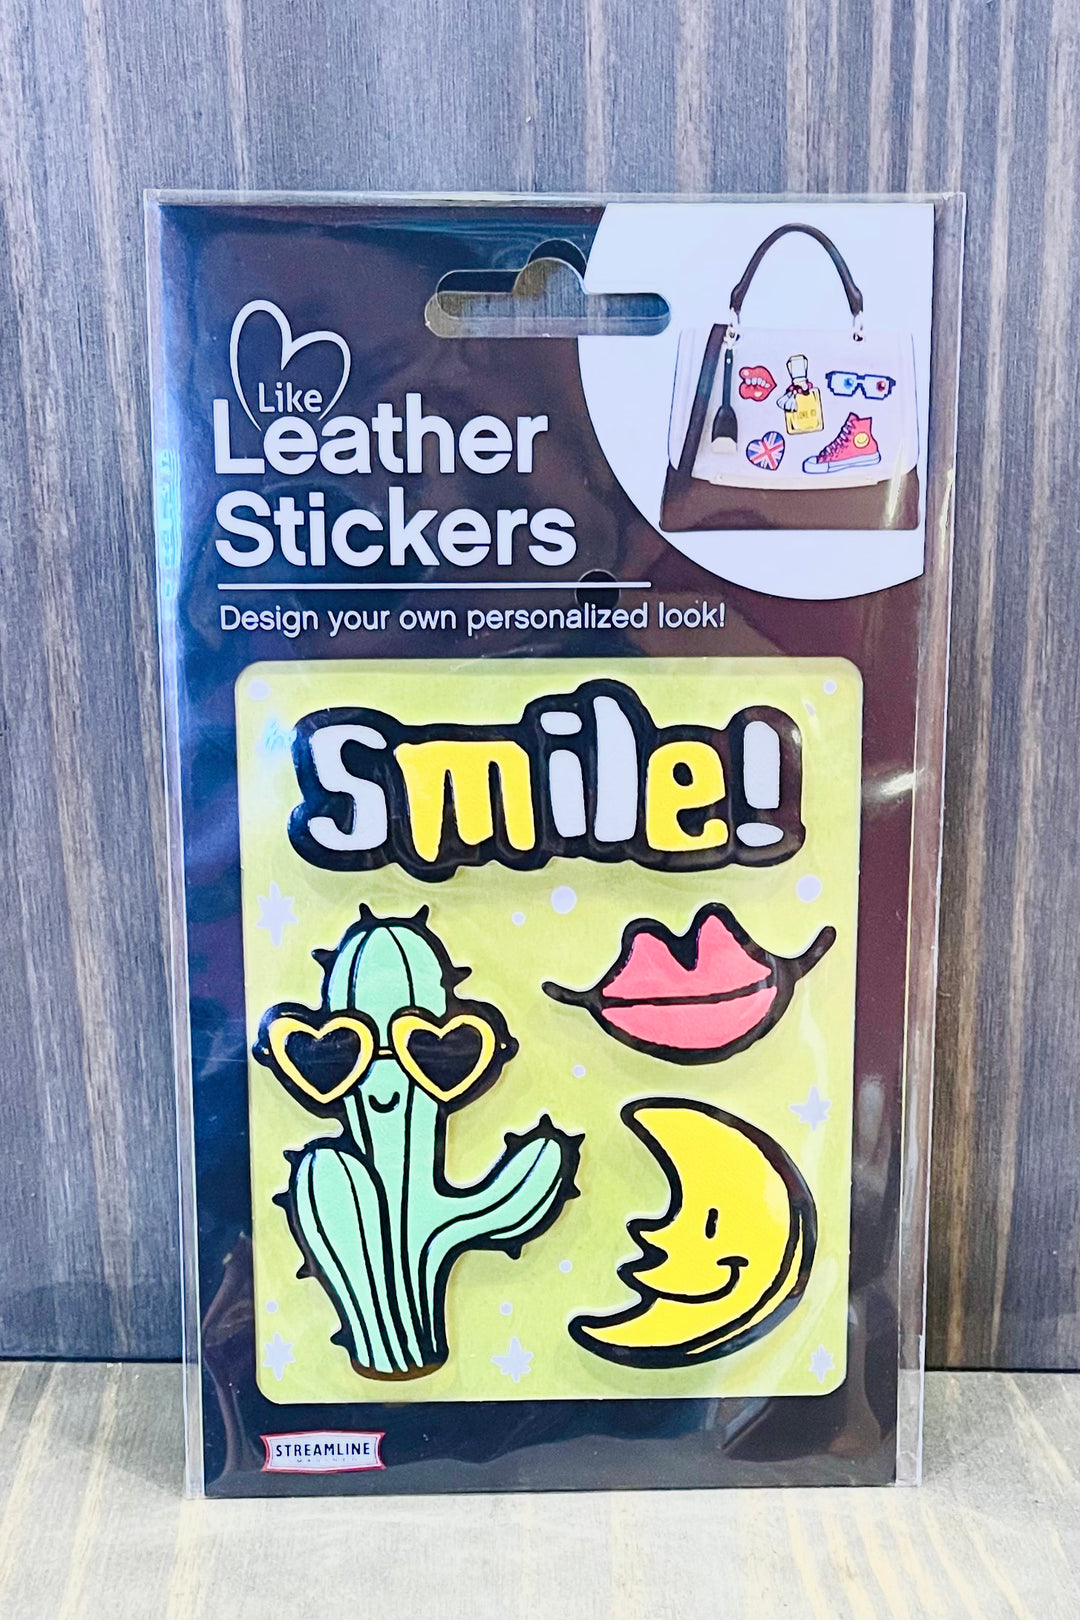 Like Leather Stickers